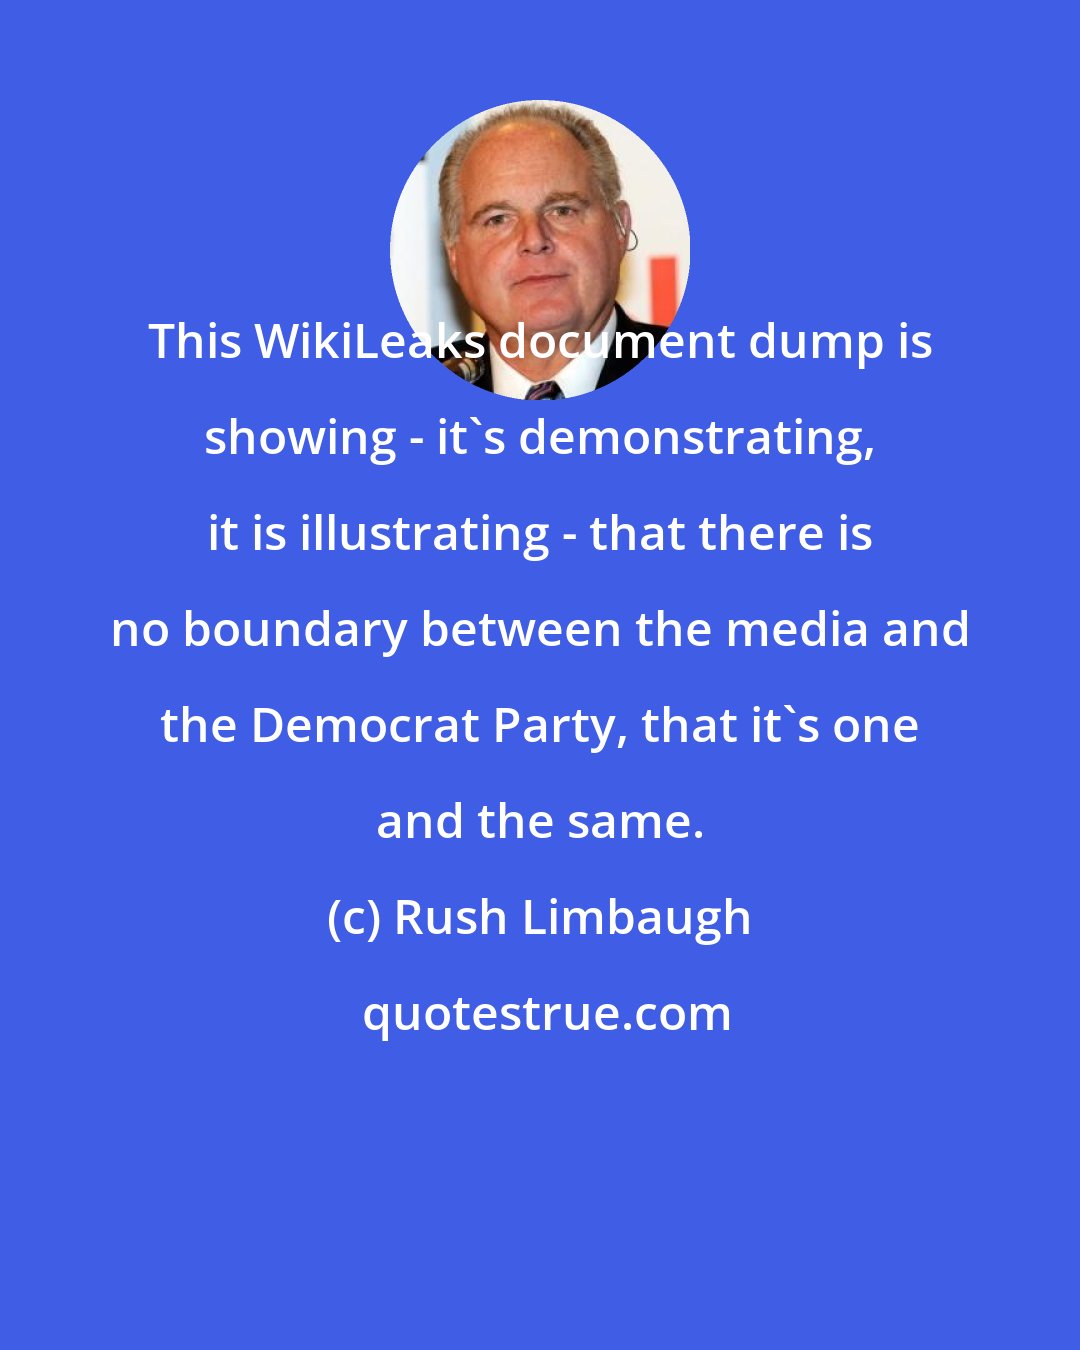 Rush Limbaugh: This WikiLeaks document dump is showing - it's demonstrating, it is illustrating - that there is no boundary between the media and the Democrat Party, that it's one and the same.